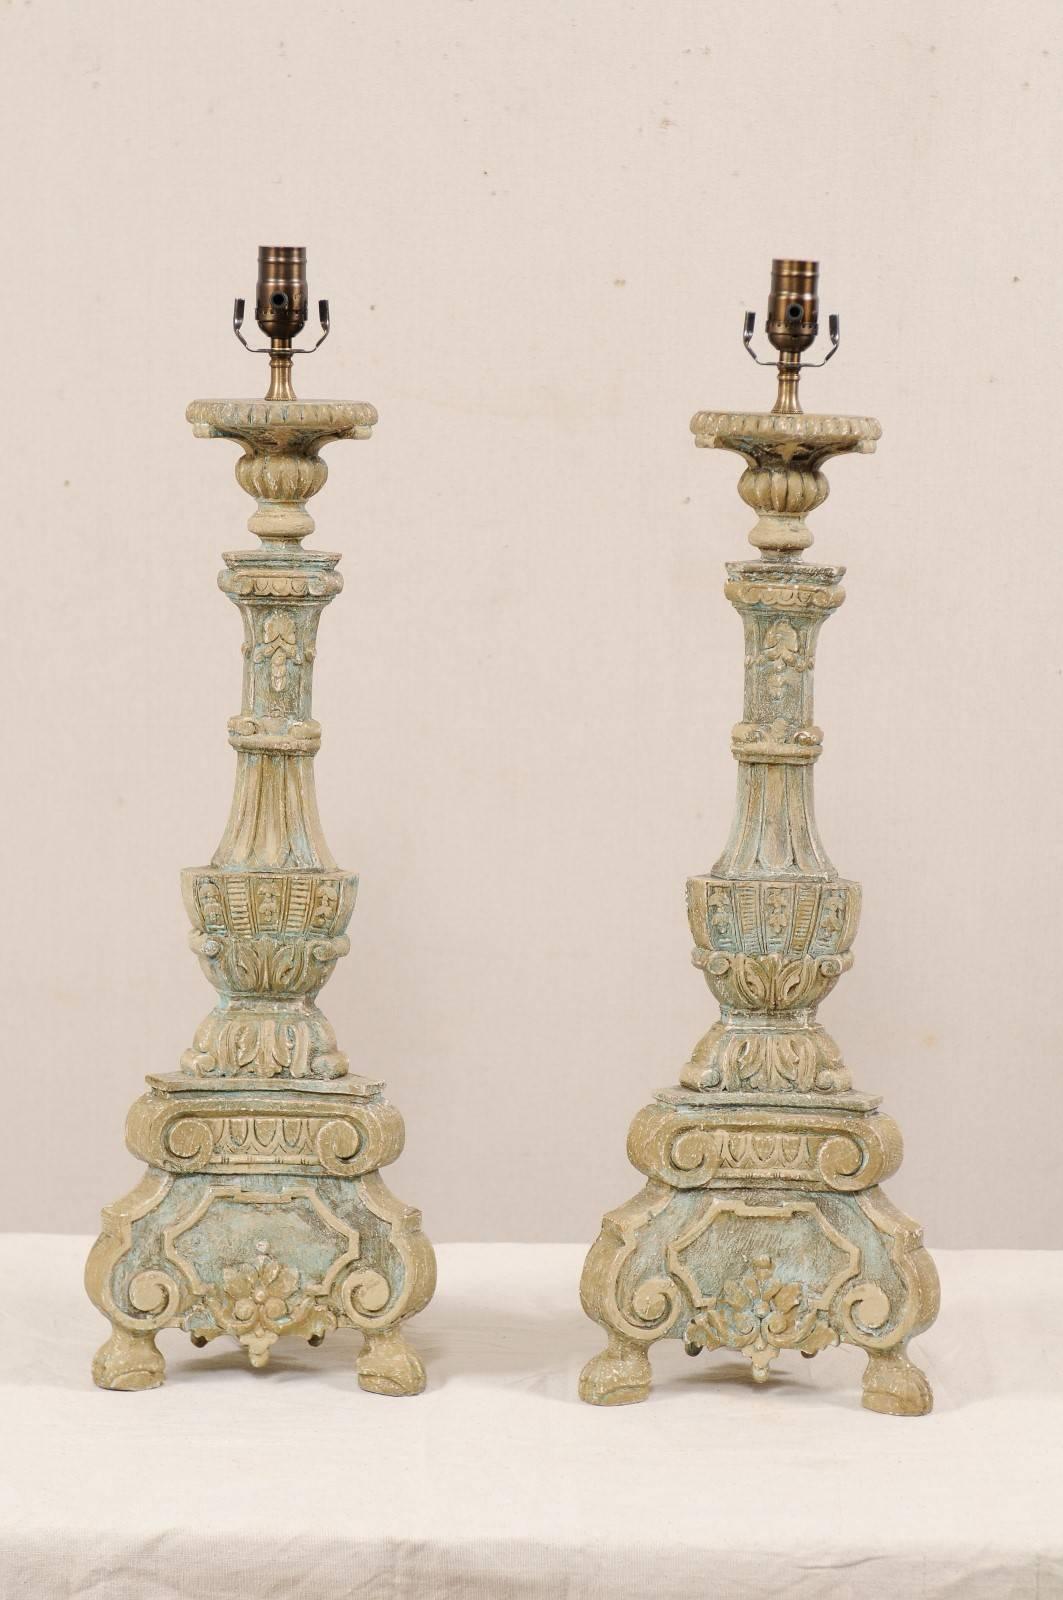 A pair of Italian style carved and painted table lamps. This pair of table lamps have been hand-carved and painted in the fashion of 18th and 19th century Italian candlesticks. They are decoratively carved in floral, leaf, and scroll motifs. Each of